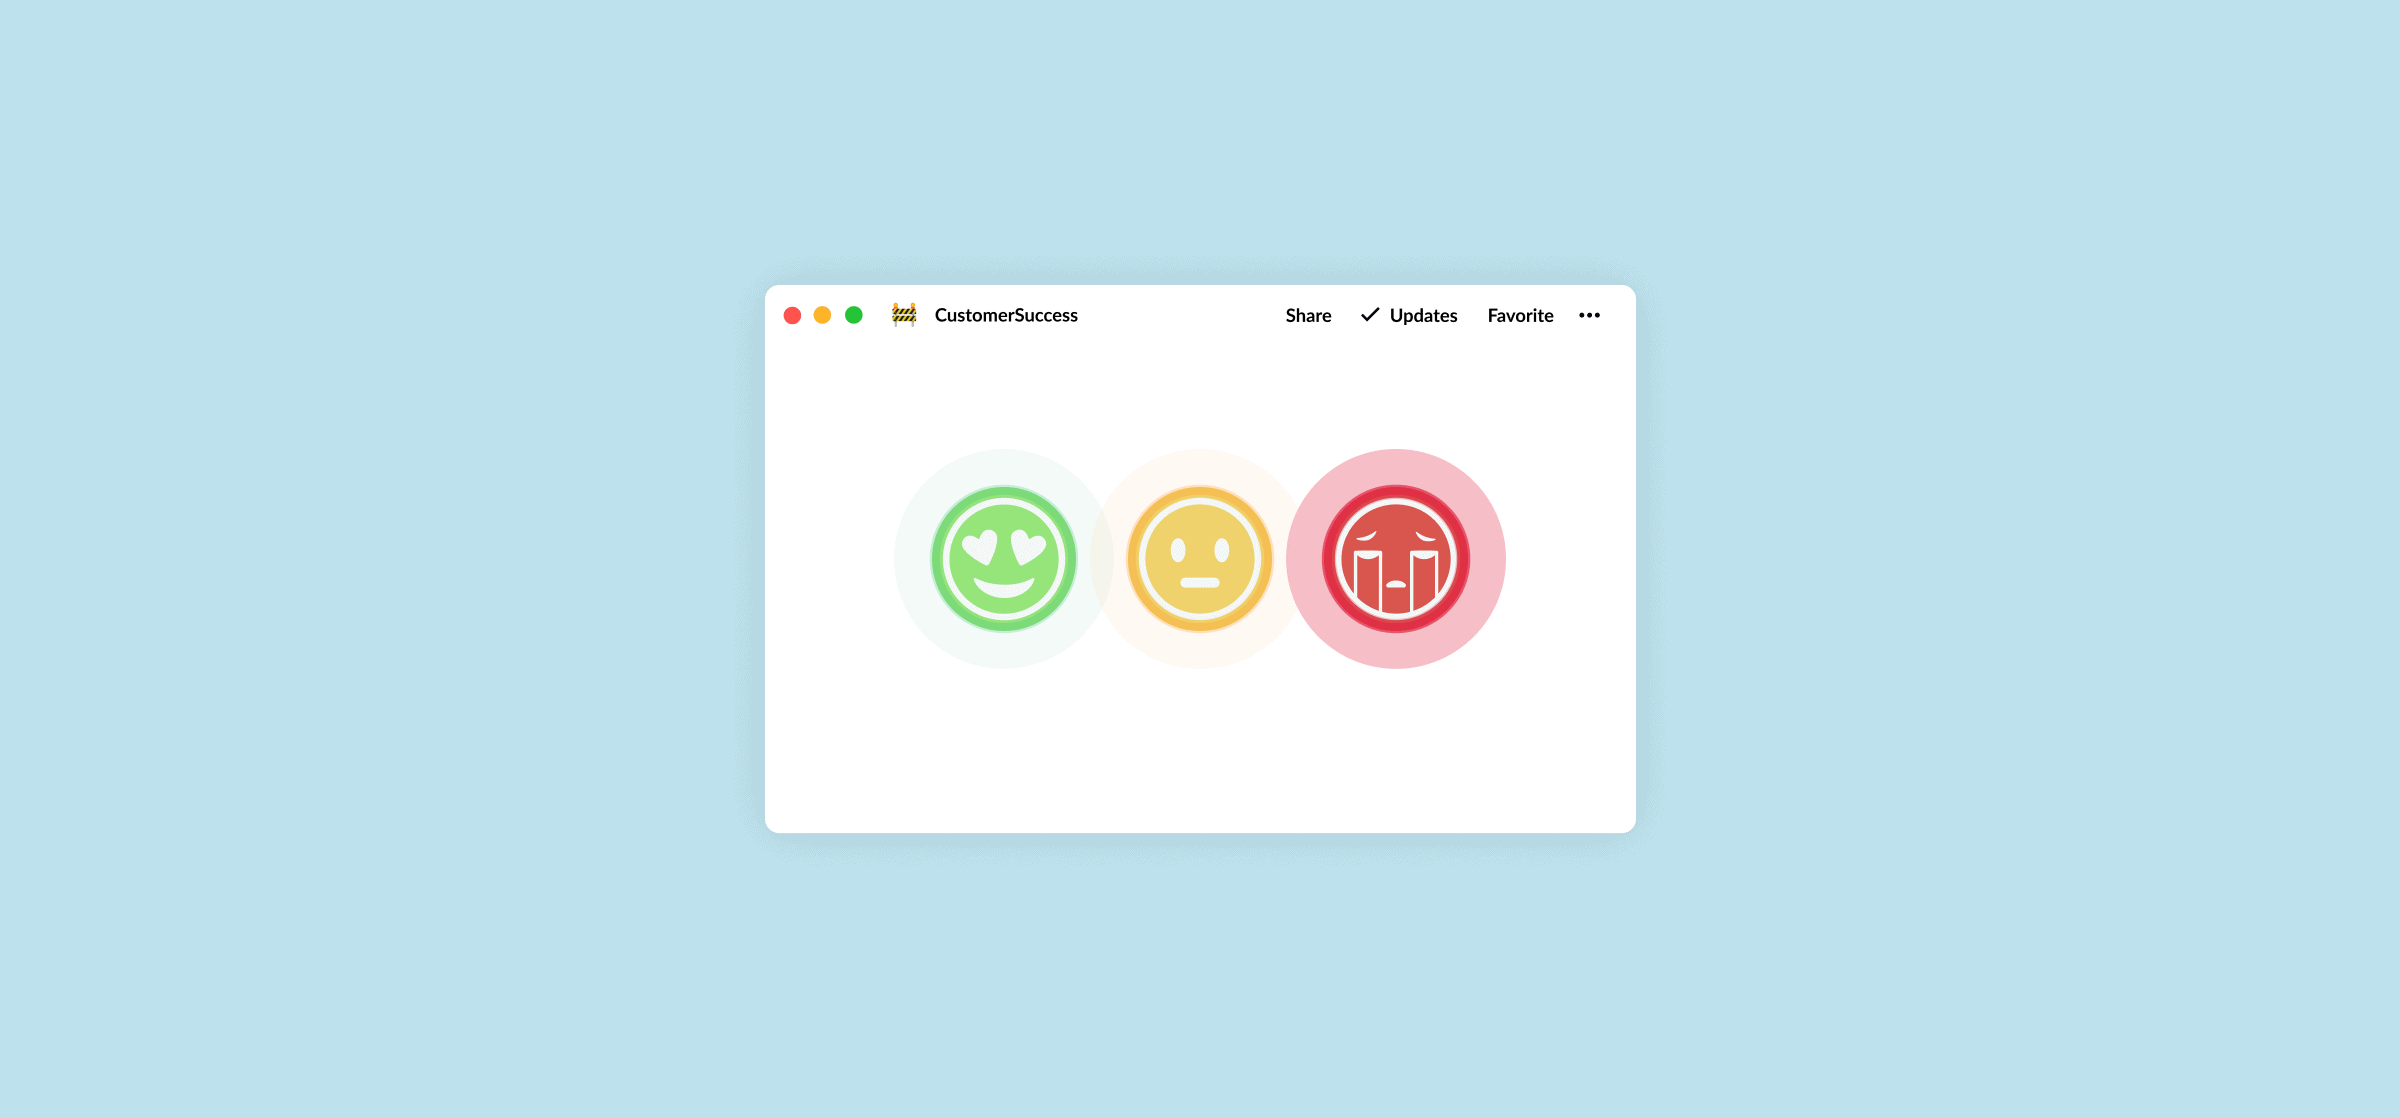 Happy, indifferent, and crying faces, representing customer success